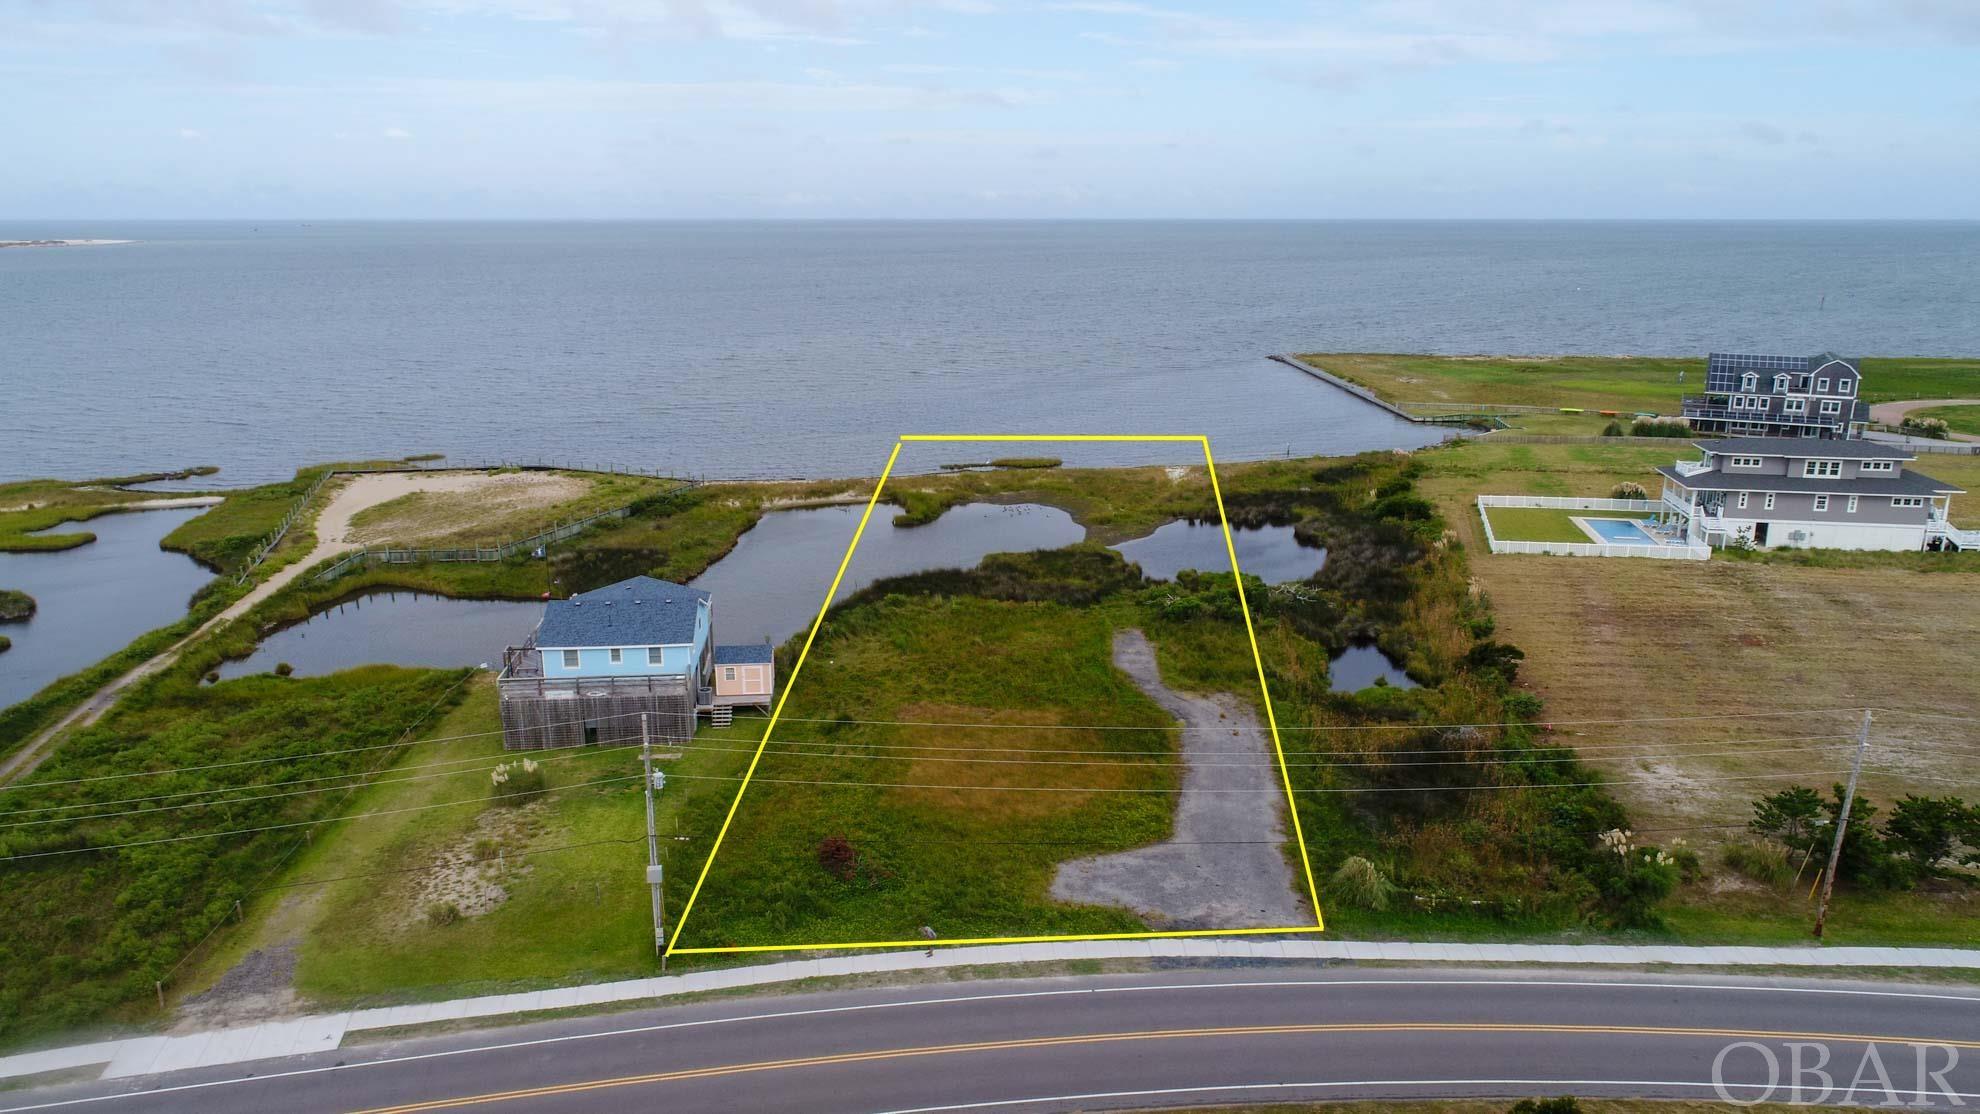 Great opportunity to secure a soundfront parcel perfect for building a small beach house looking over Pamlico Sound with no HOA restrictions.